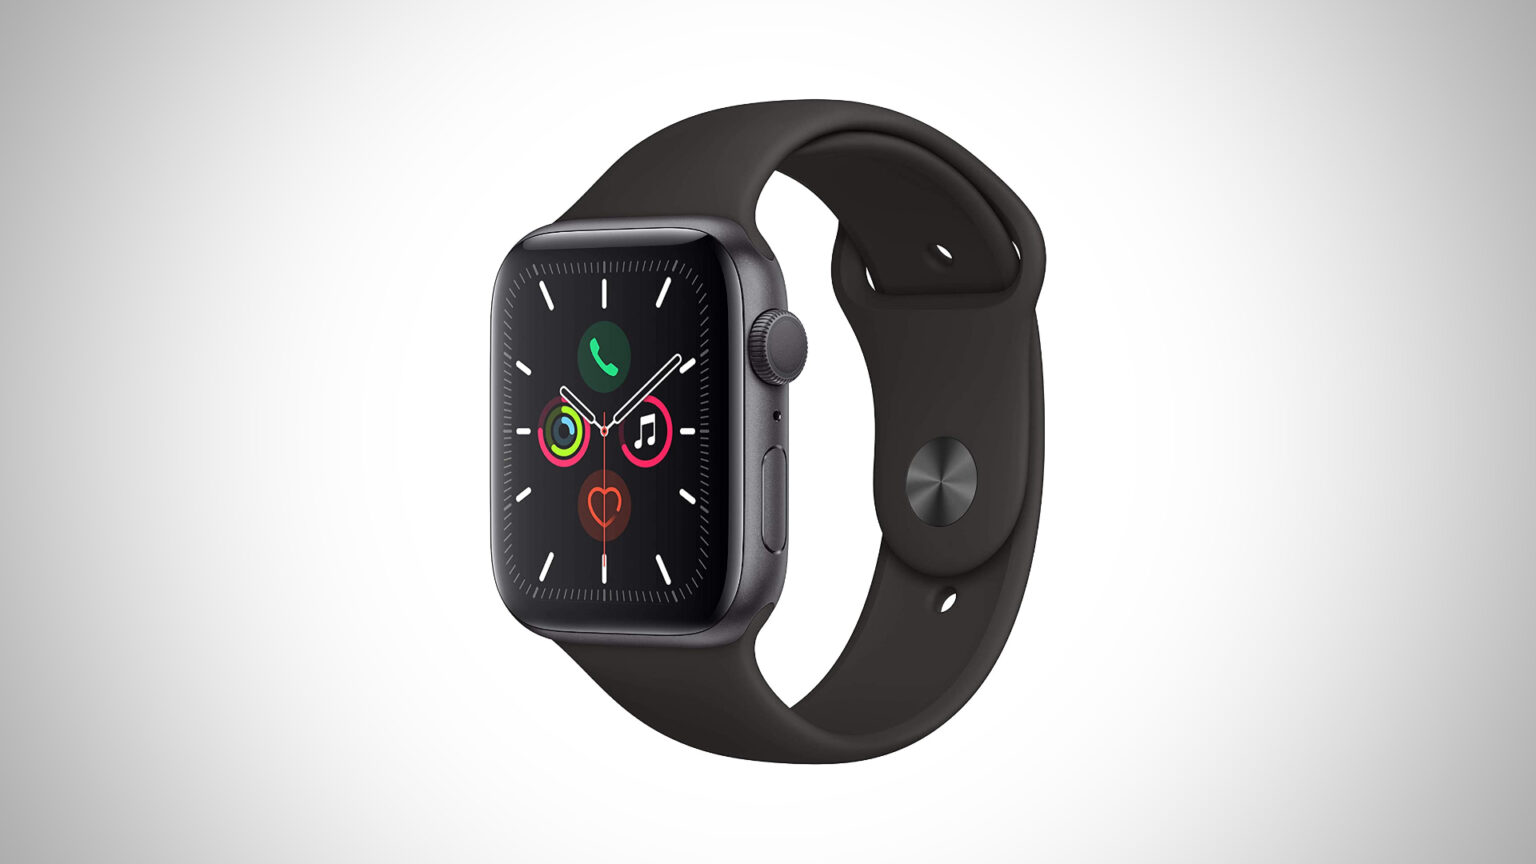 Get Apple Watch 5 at its lowest price yet